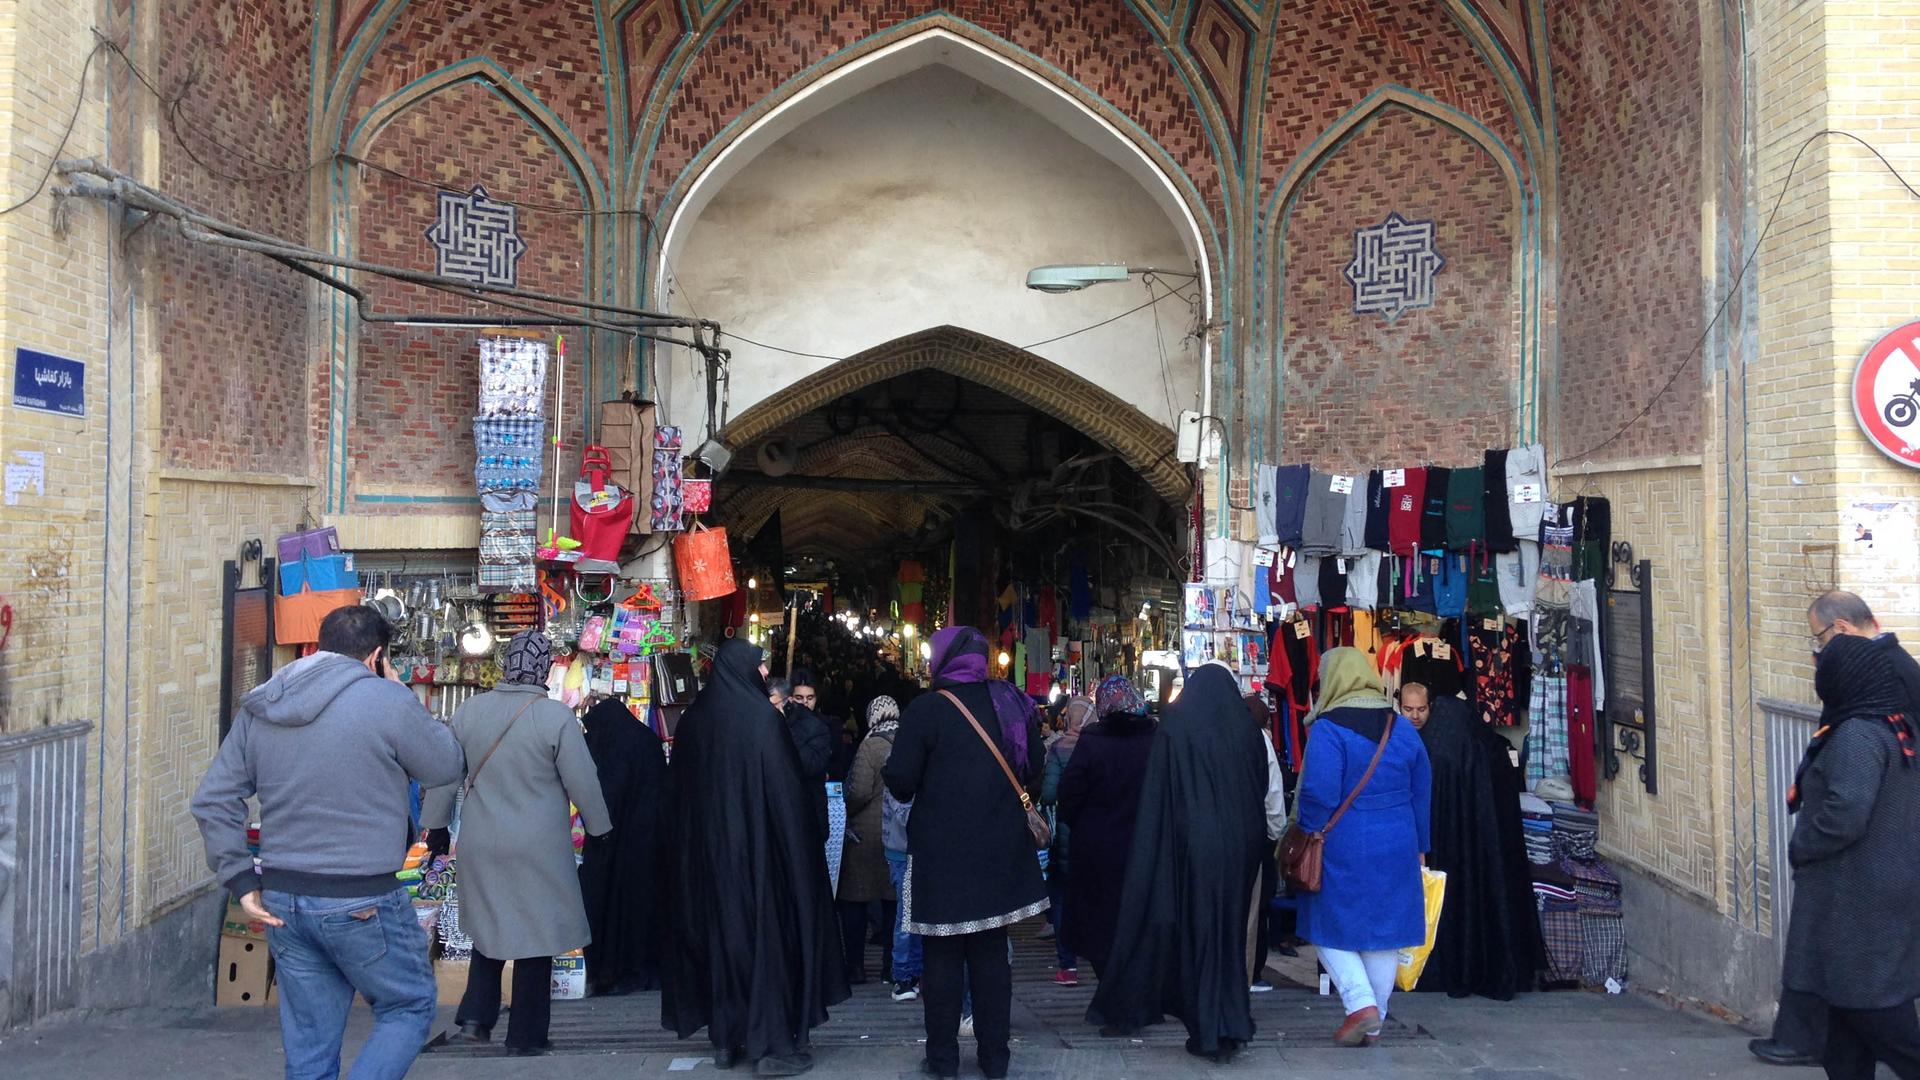 Shoppers at the grand bazaar in Tehran.